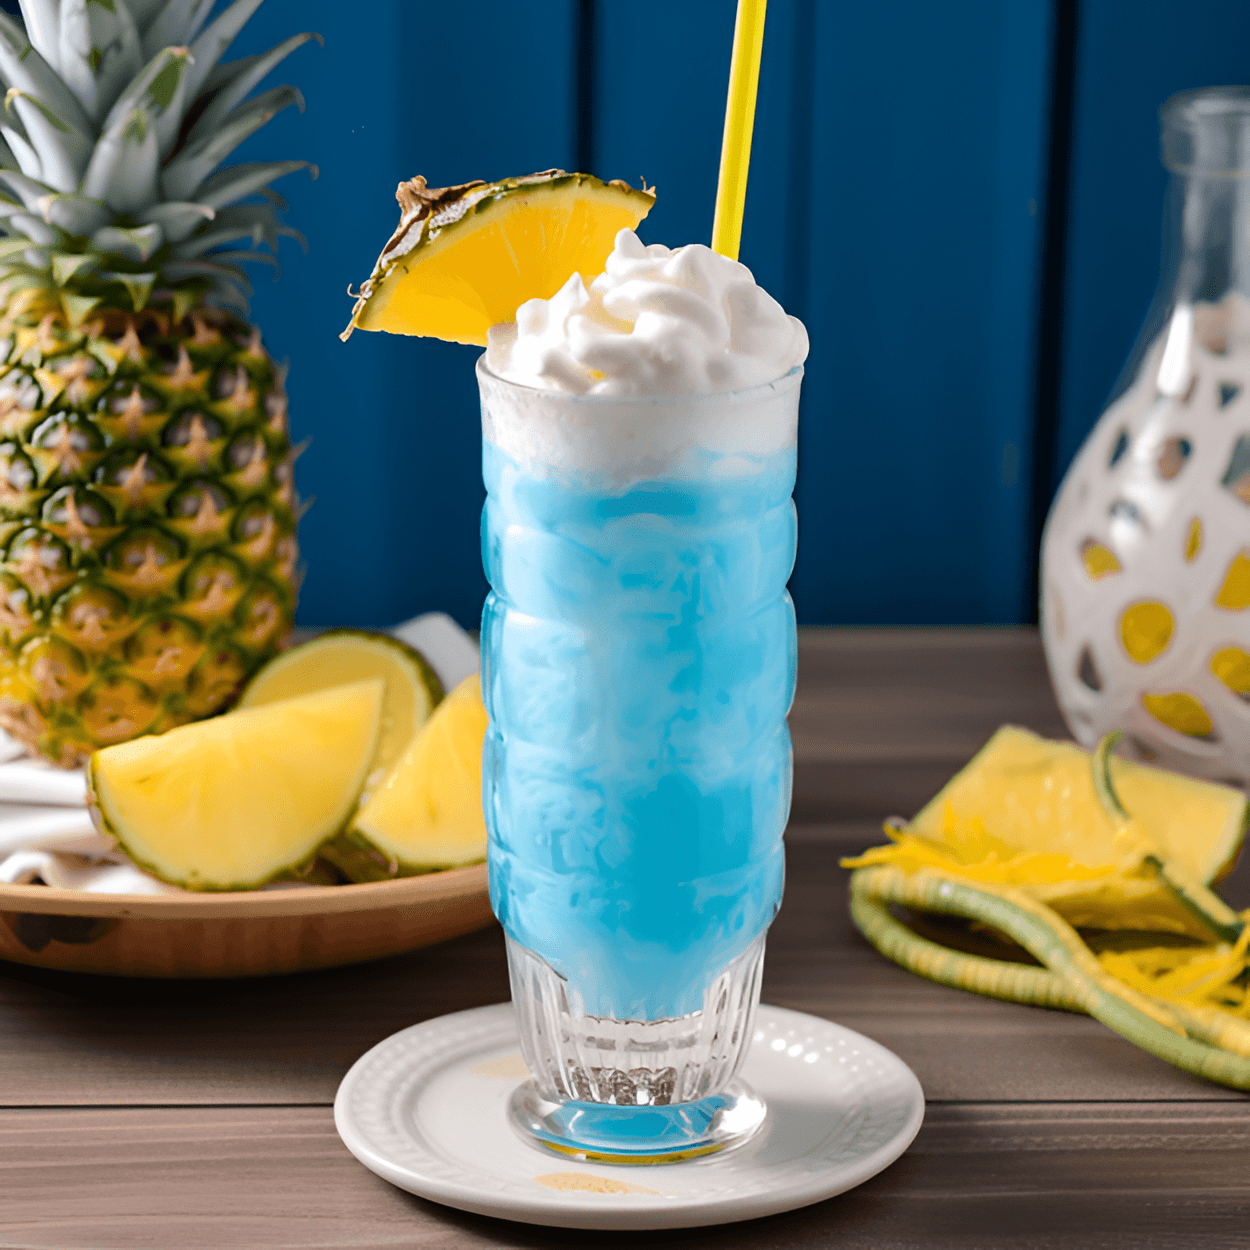 The Minions Cocktail Recipe - The Minions Cocktail is a sweet and tangy delight. The combination of pineapple juice, coconut rum, and blue curacao gives it a tropical, fruity flavor with a hint of citrus. The whipped cream topping adds a creamy, velvety texture that balances the acidity of the other ingredients.